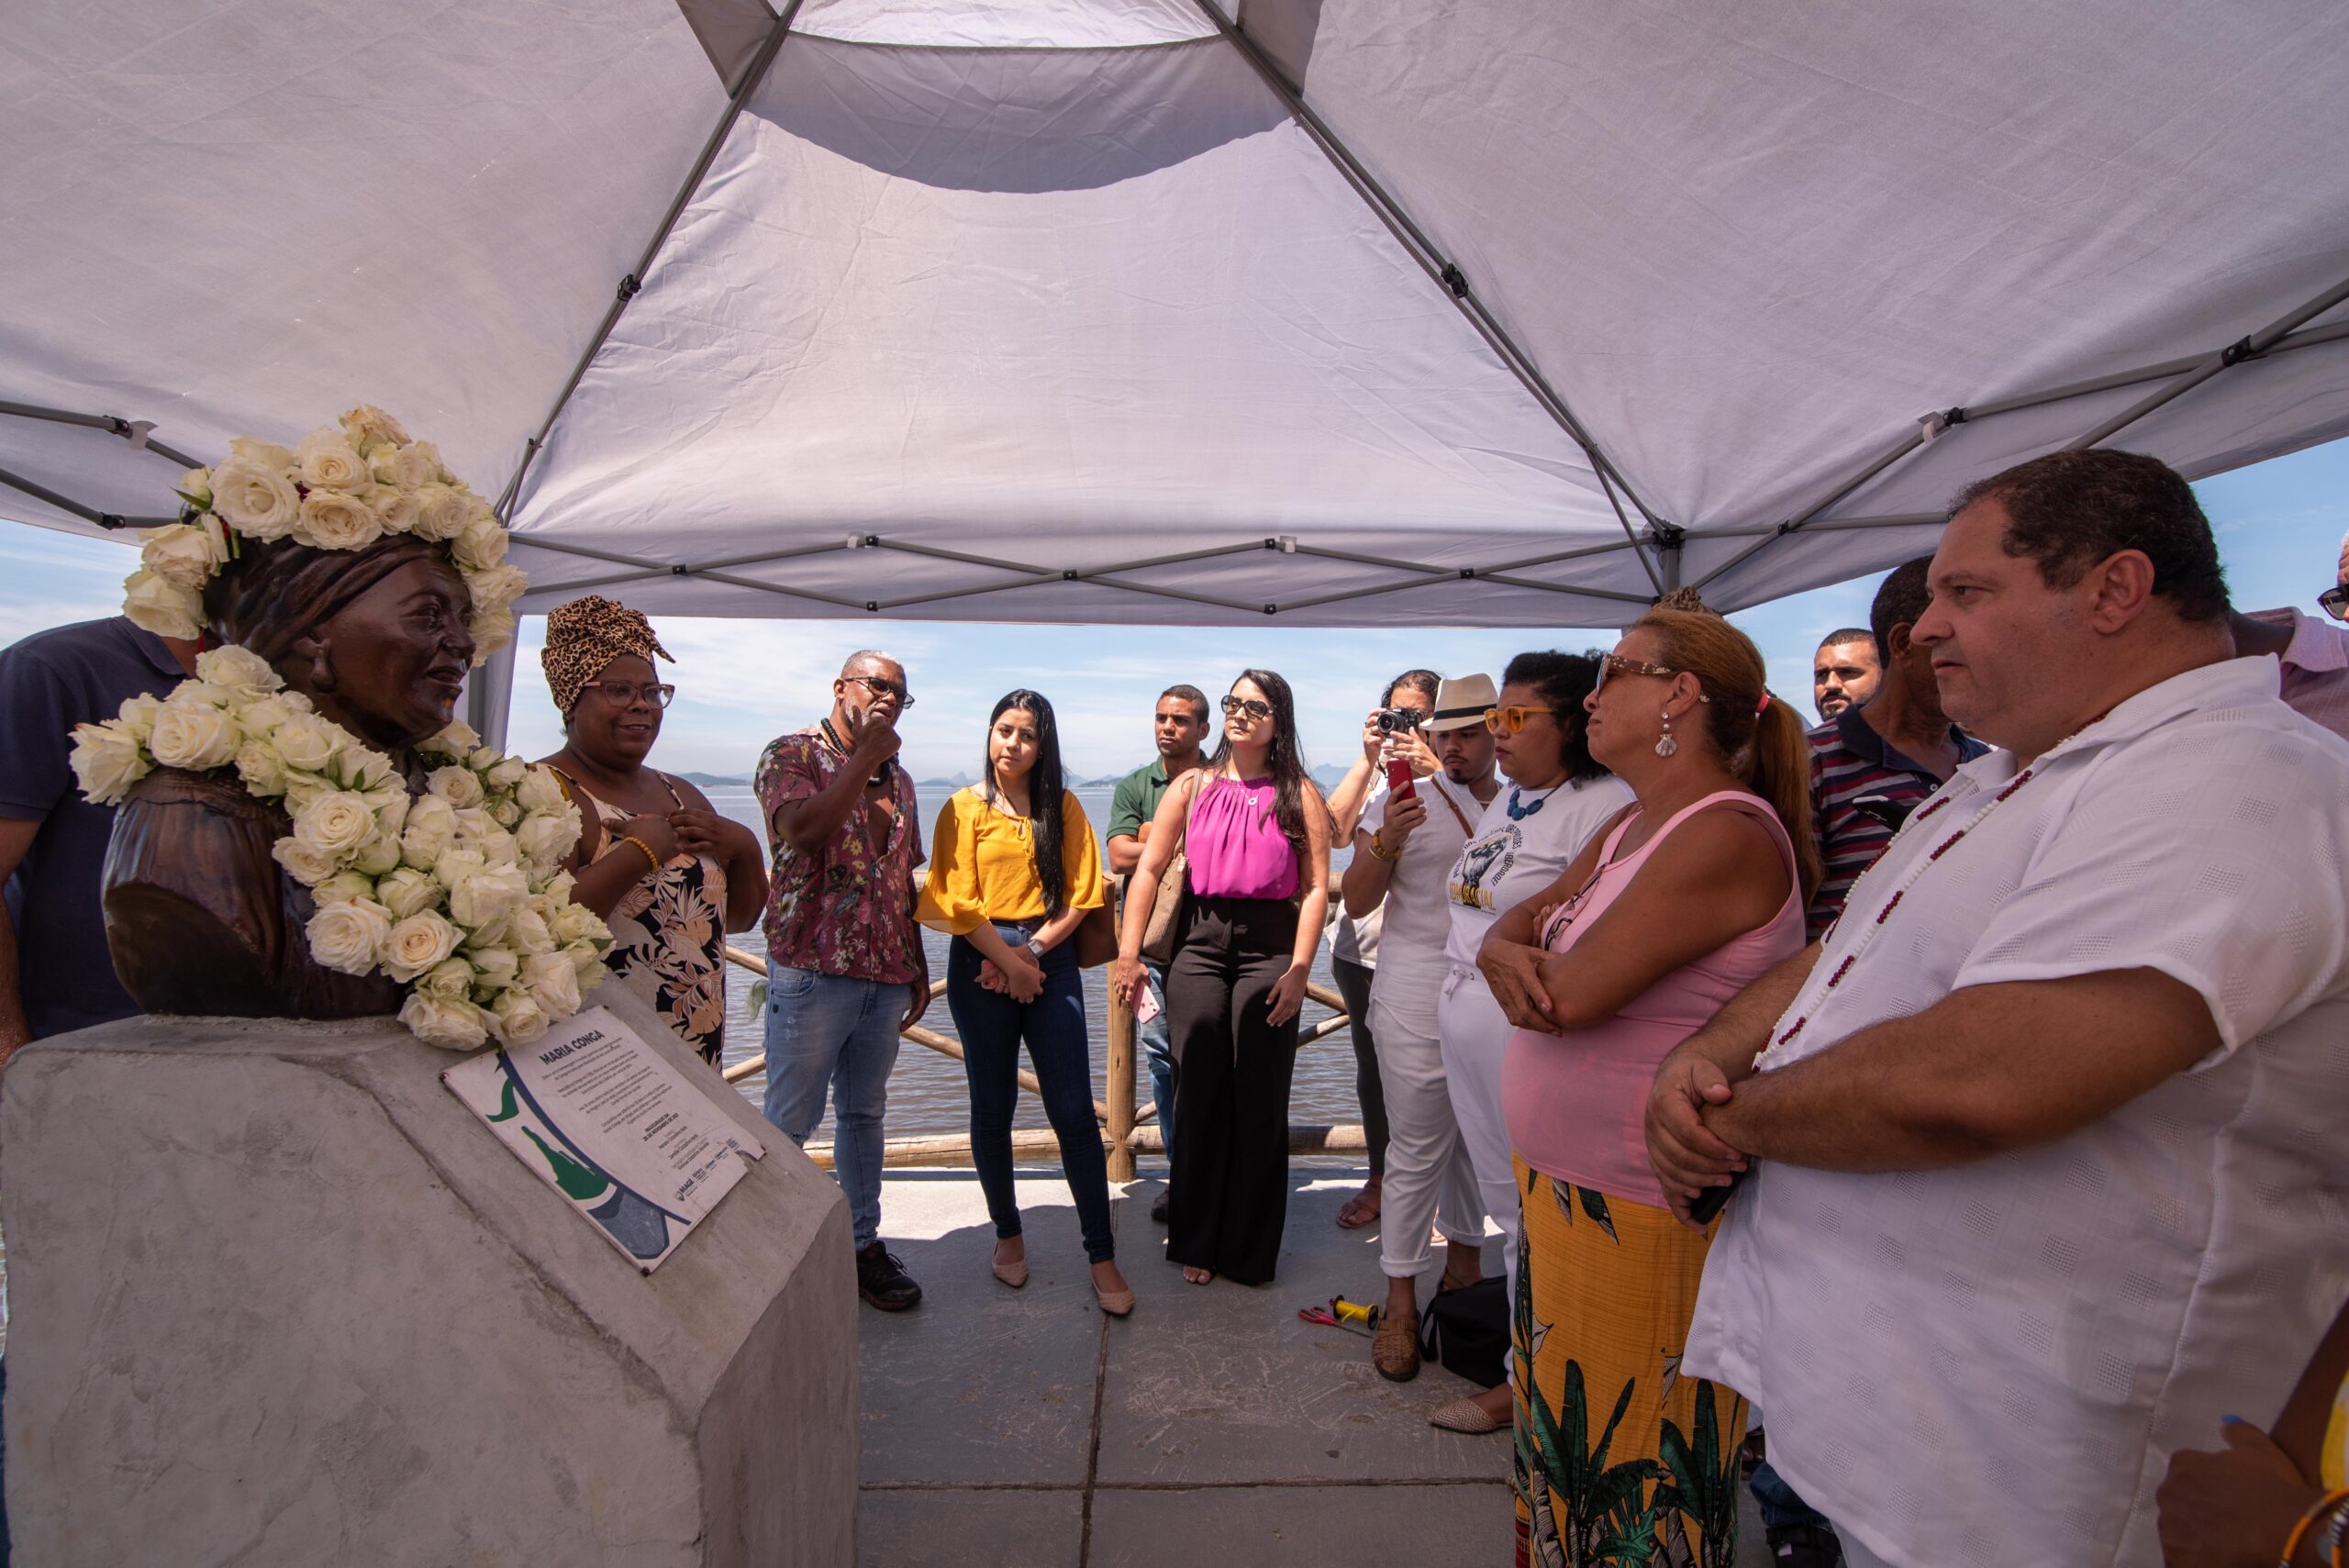 Participants at the event “Maria Conga’s Coronation,” an act of defiance against the Nazi and racist vandalism of the bust. Photo: Bárbara Dias